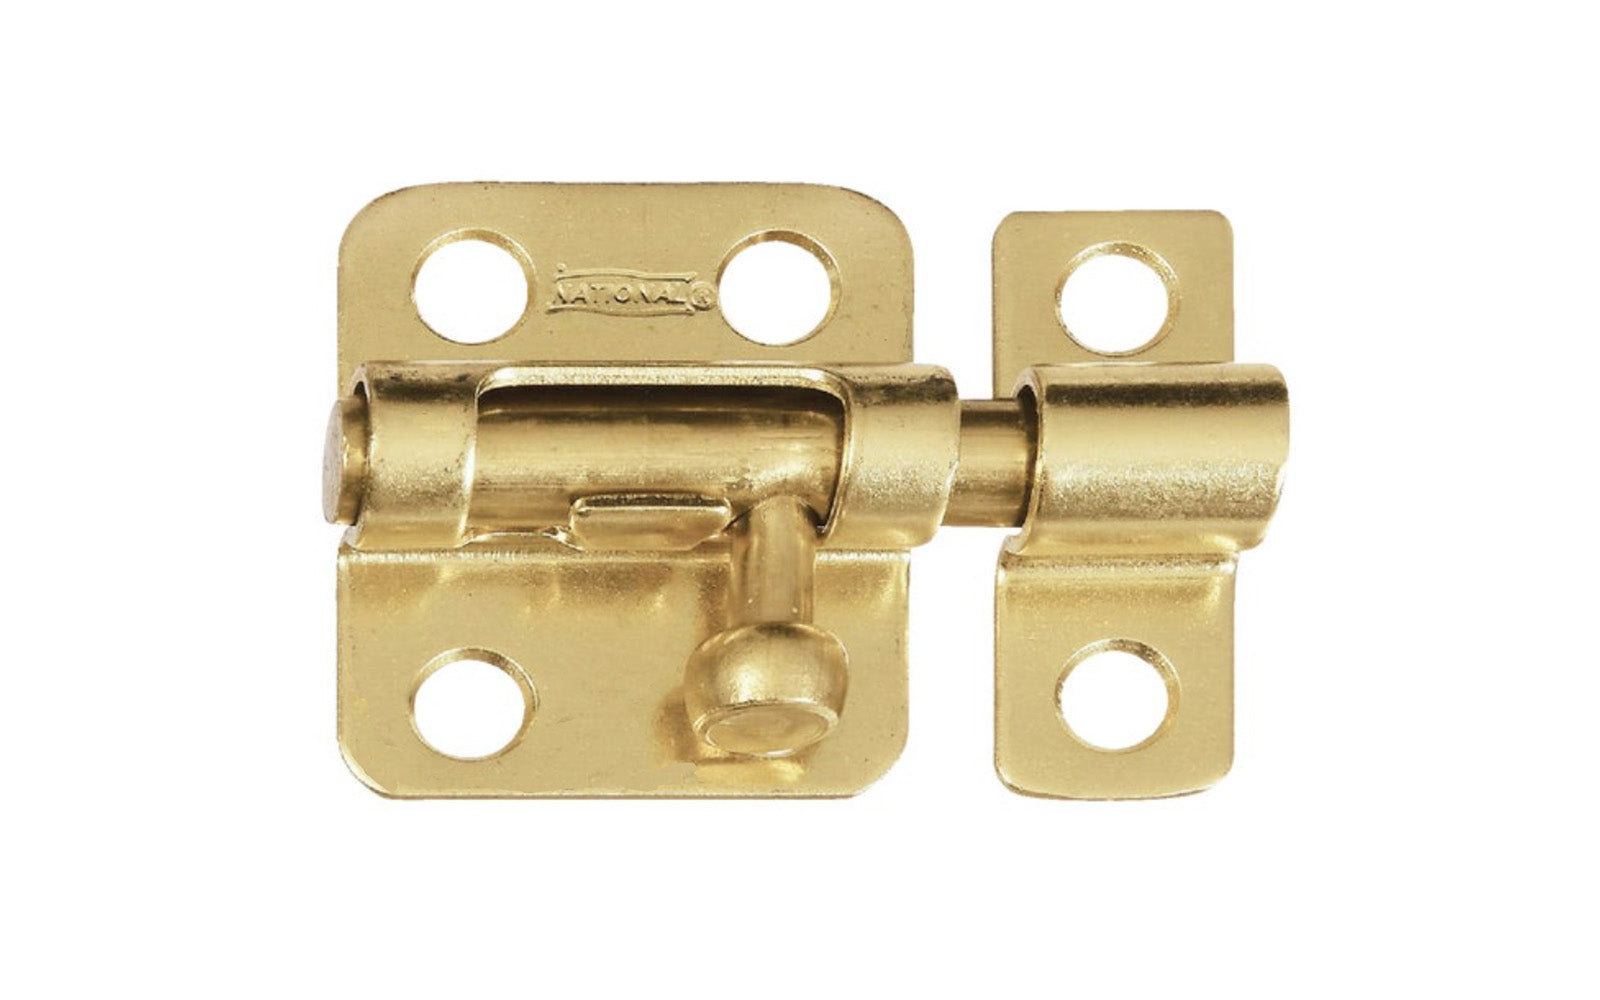 This 2" Solid Brass Barrel Bolt is designed for security applications on lightweight doors, chests, & cabinets. Use on vertical, horizontal, left or right hand applications. Made of solid brass with a lacquered finish. Six solid brass phillips screws. 2" width x 1-1/2" height. National Hardware Model No. N213-405. 